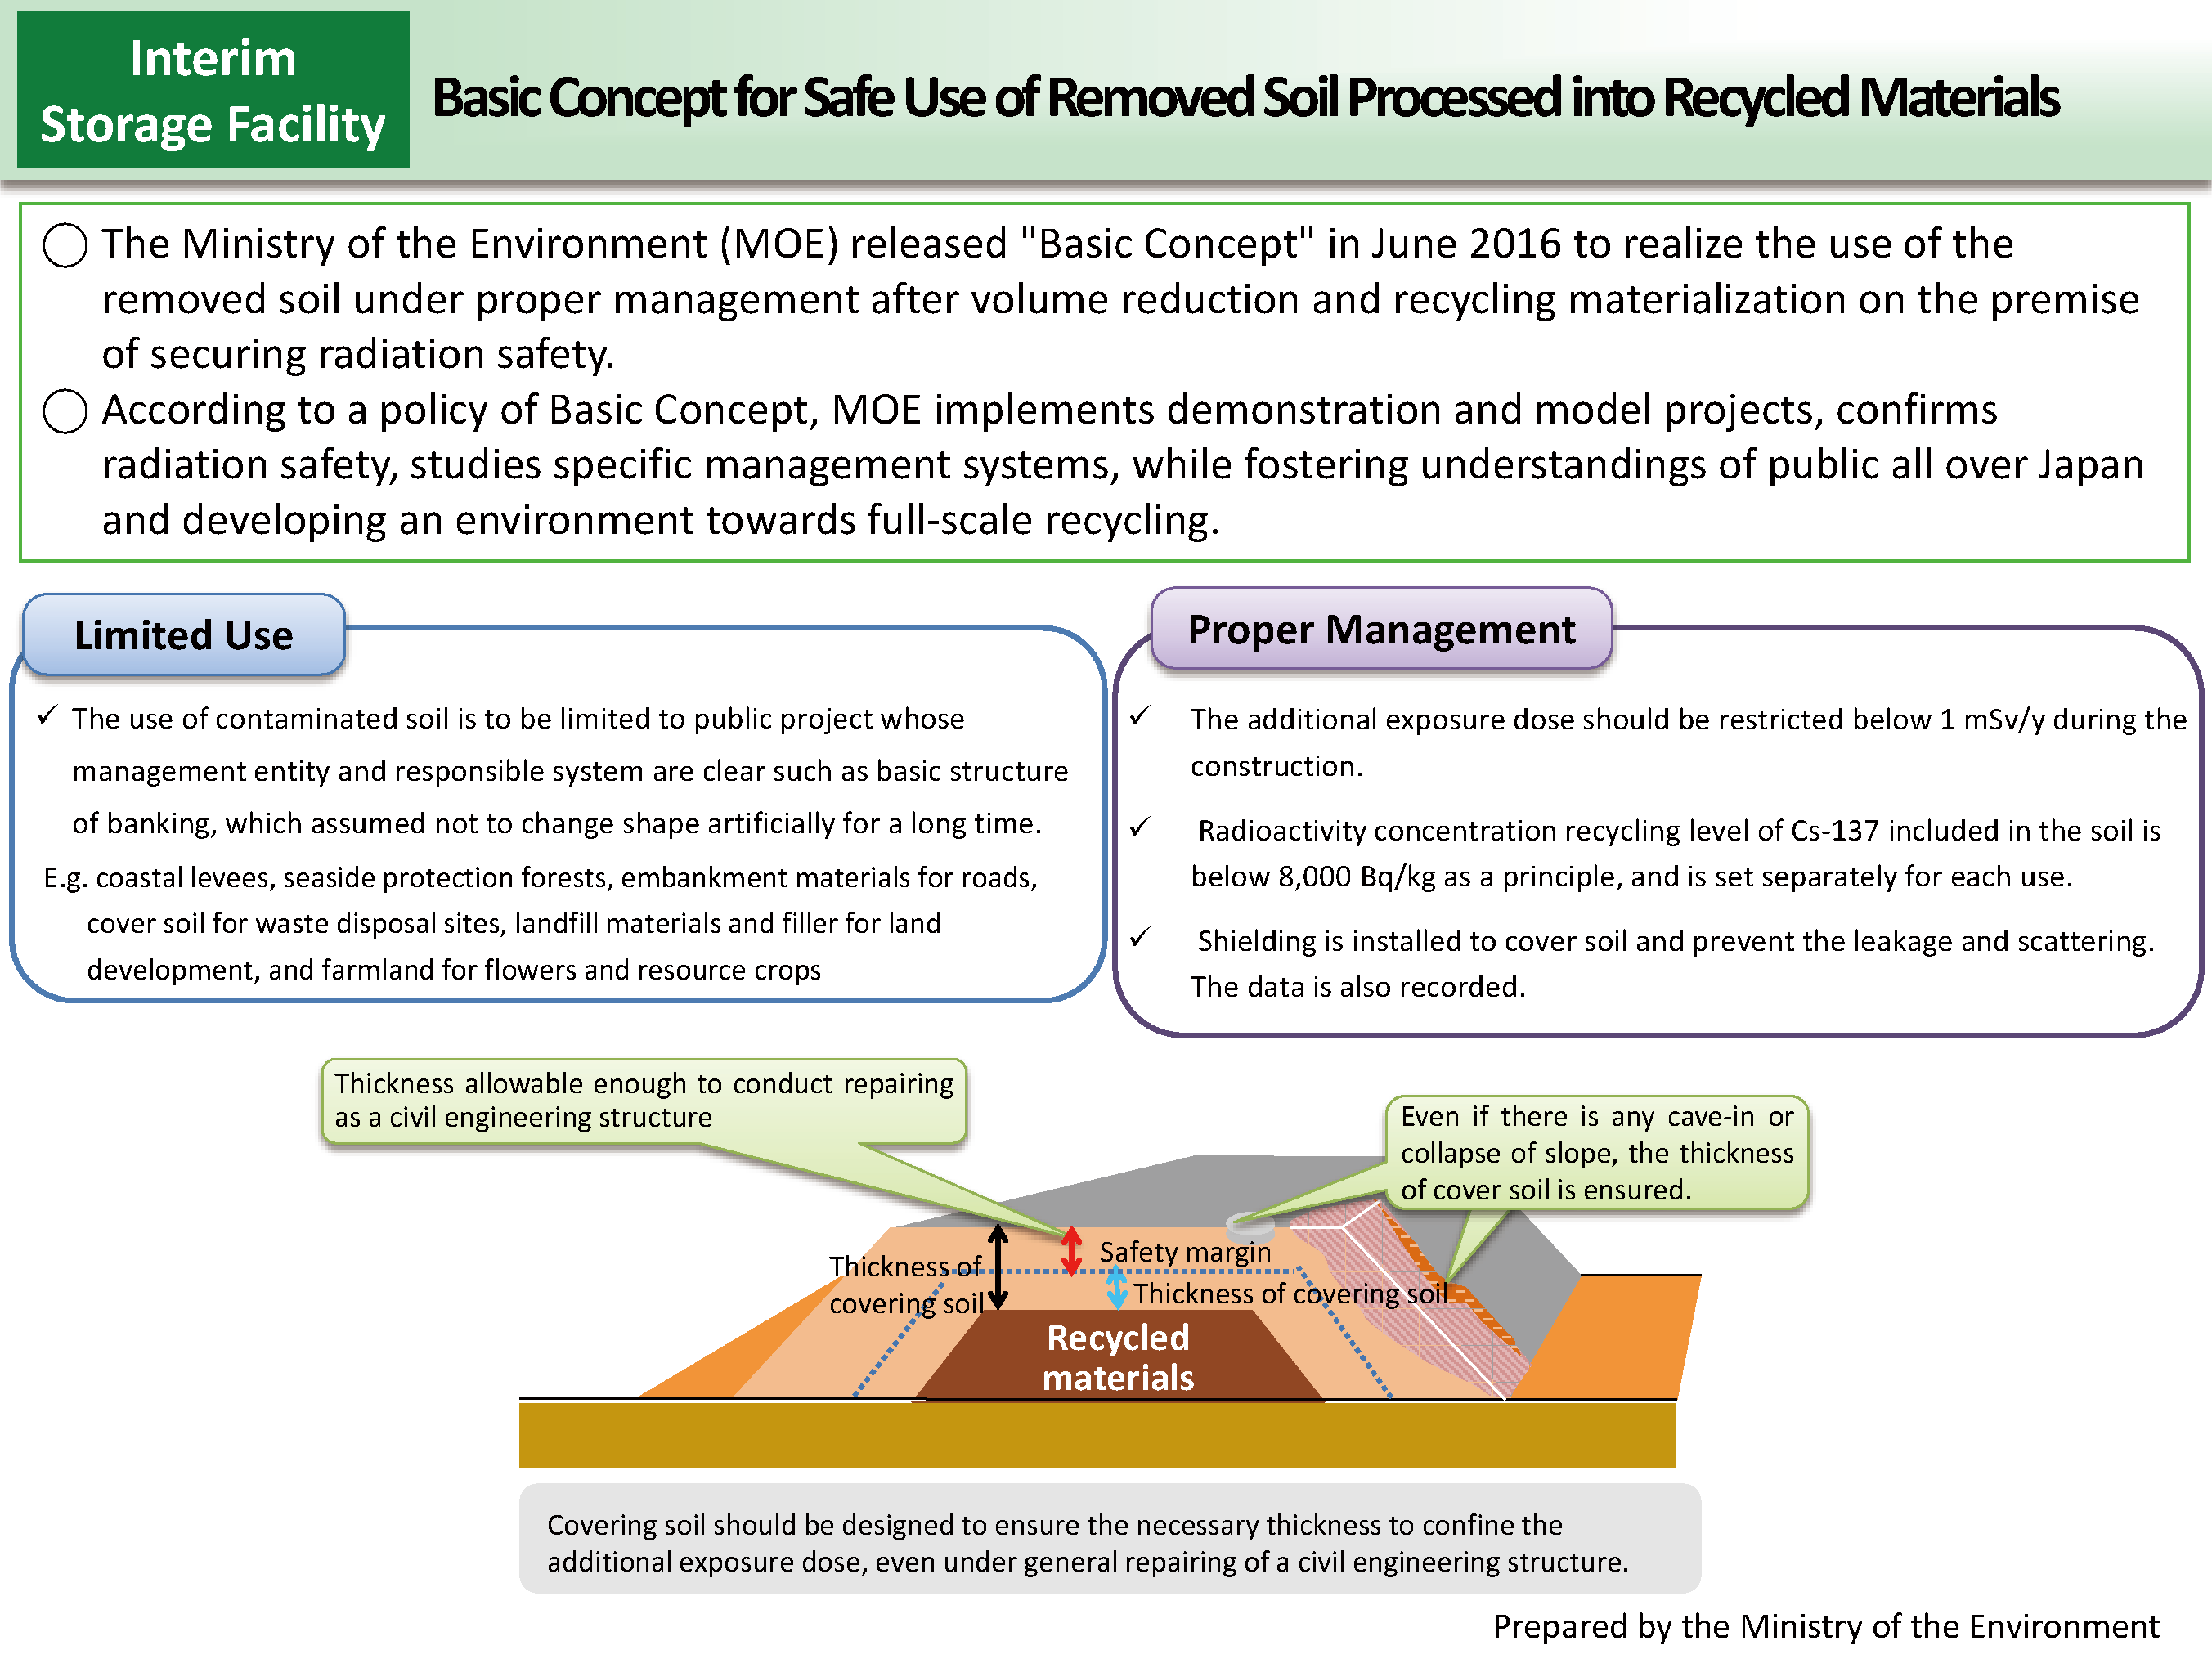 Basic Concept for Safe Use of Removed Soil Processed into Recycled Materials_Figure